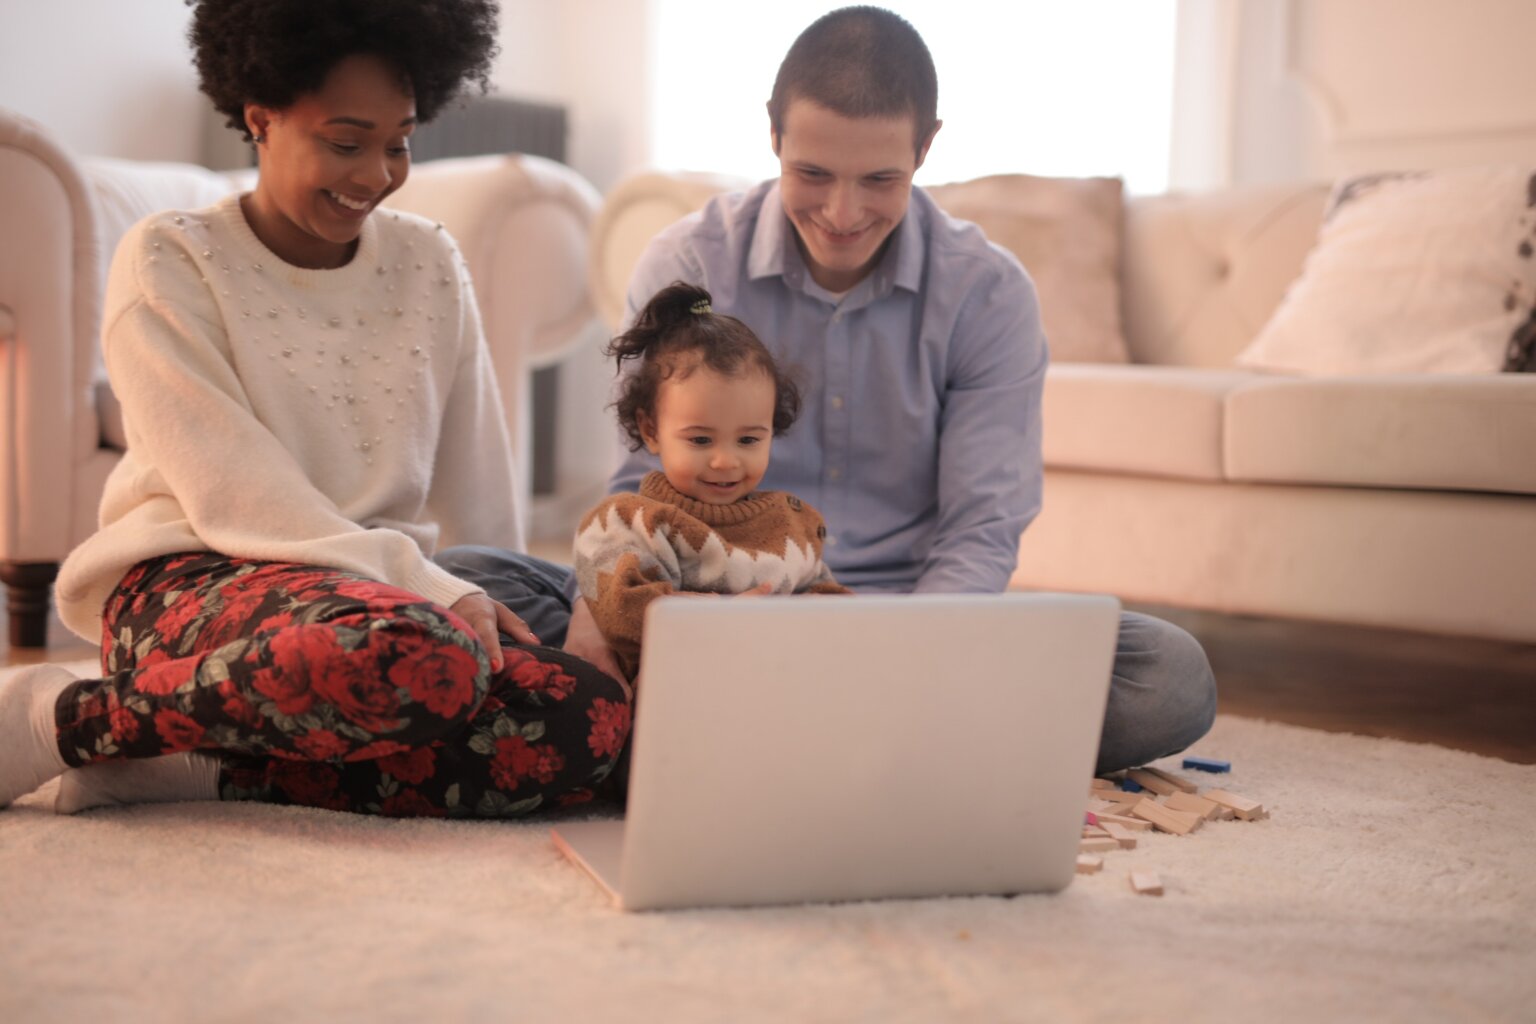 A dad, mom, and daughter laughing at a video on a computer while sitting on the floor.